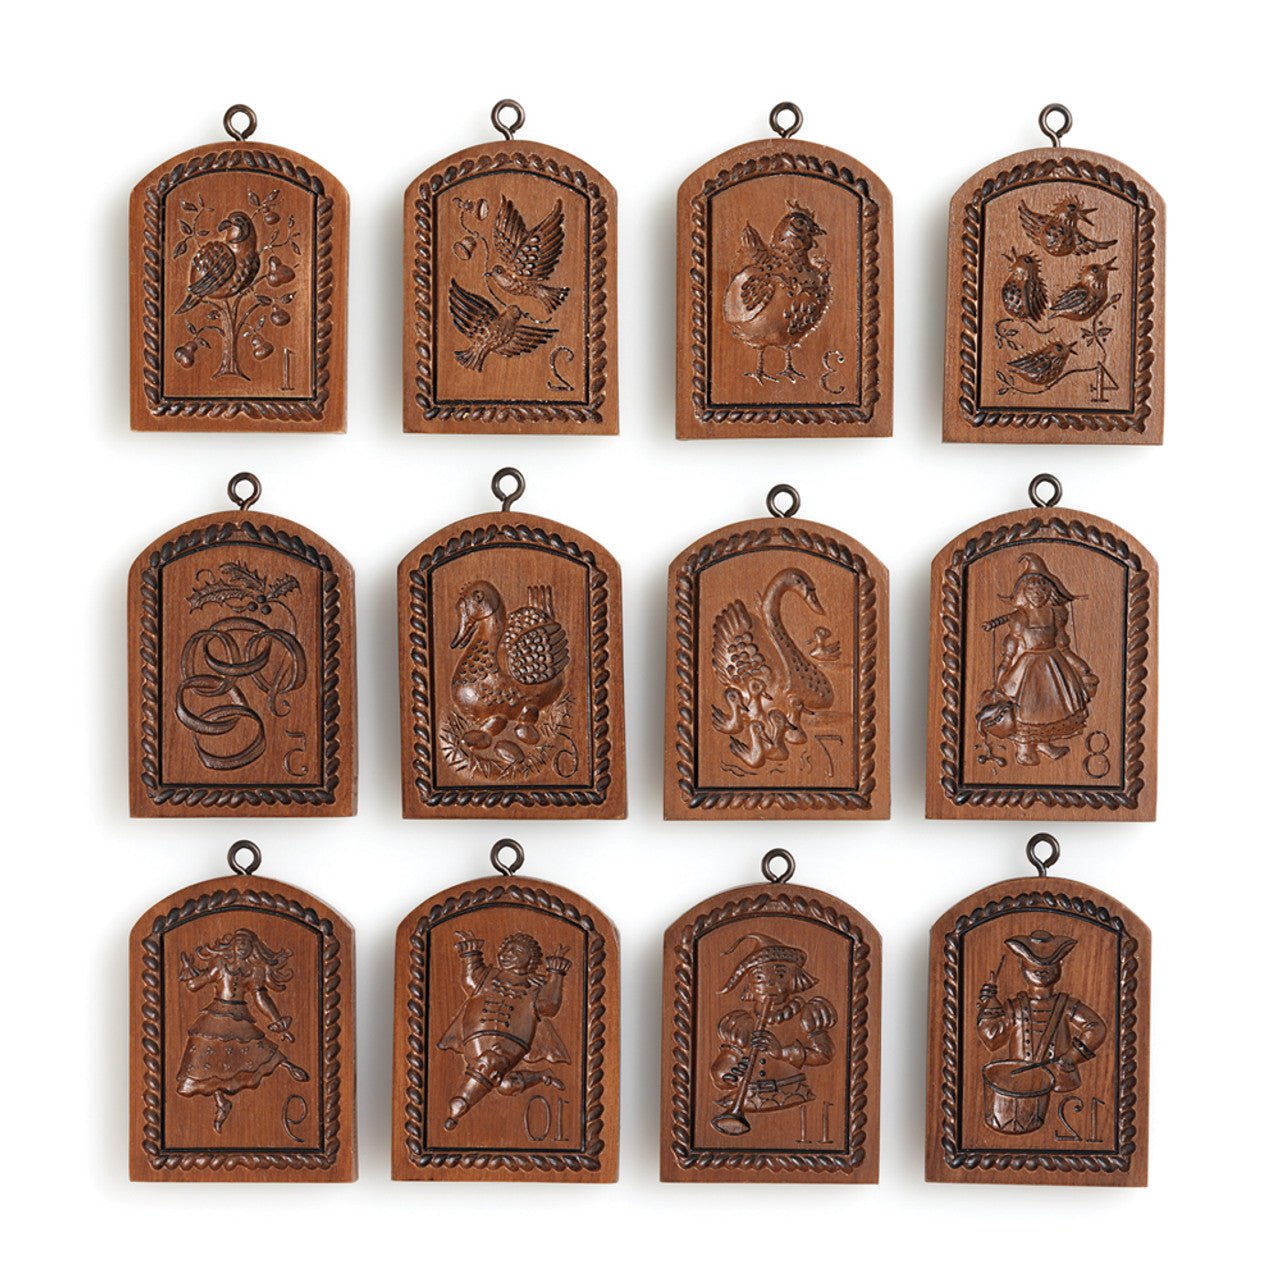 12 Days of Christmas Cookie Molds